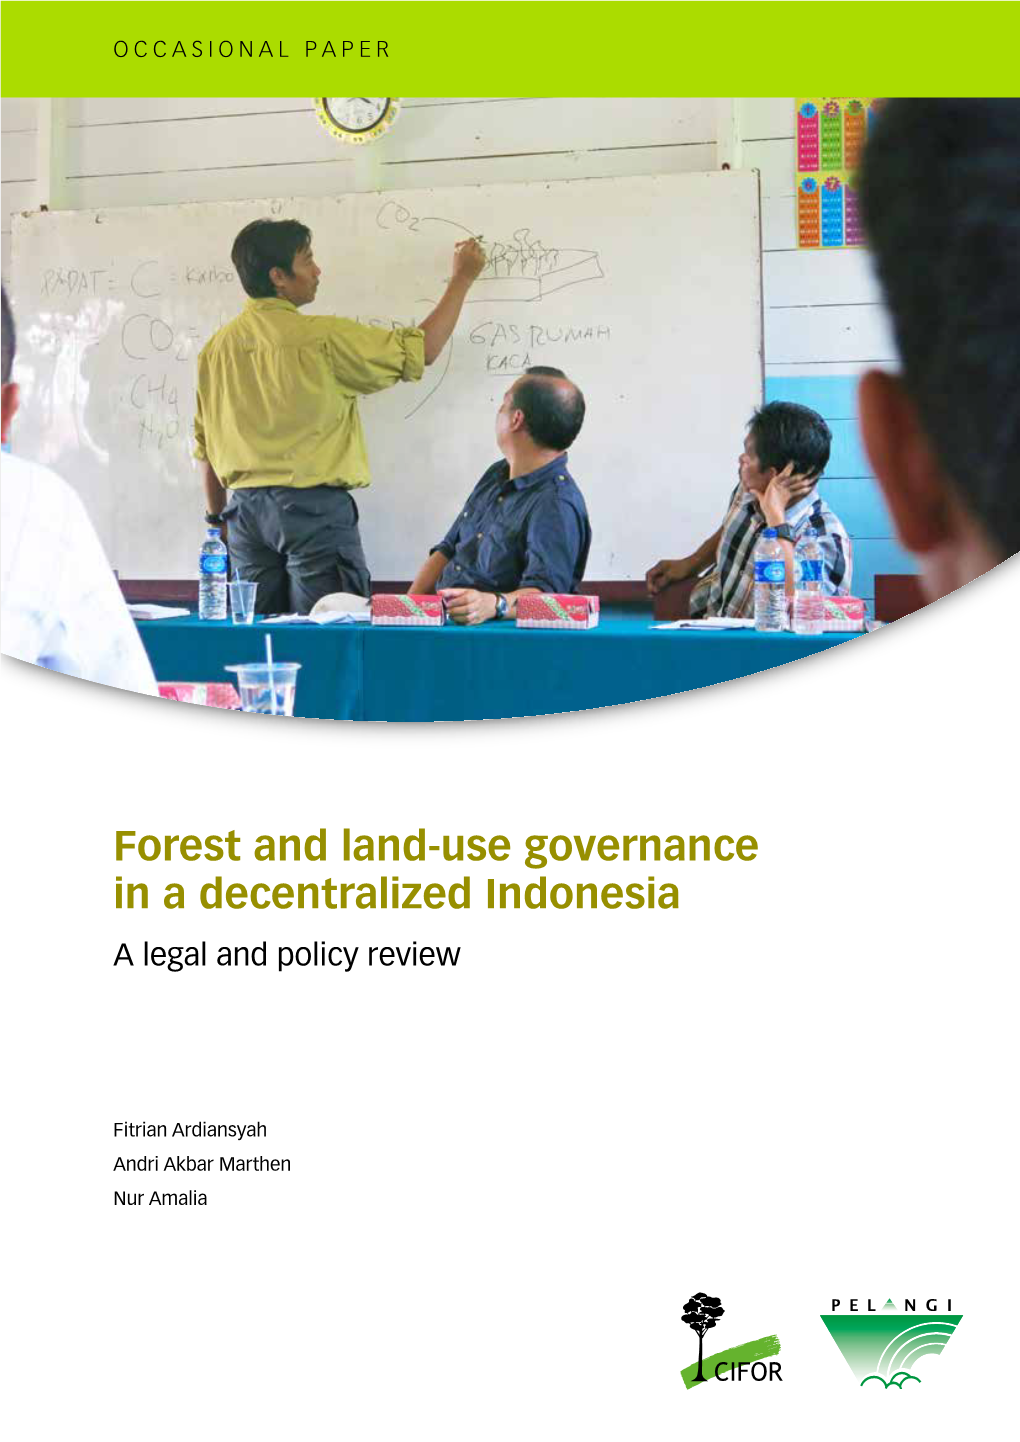 Forest and Land-Use Governance in a Decentralized Indonesia a Legal and Policy Review